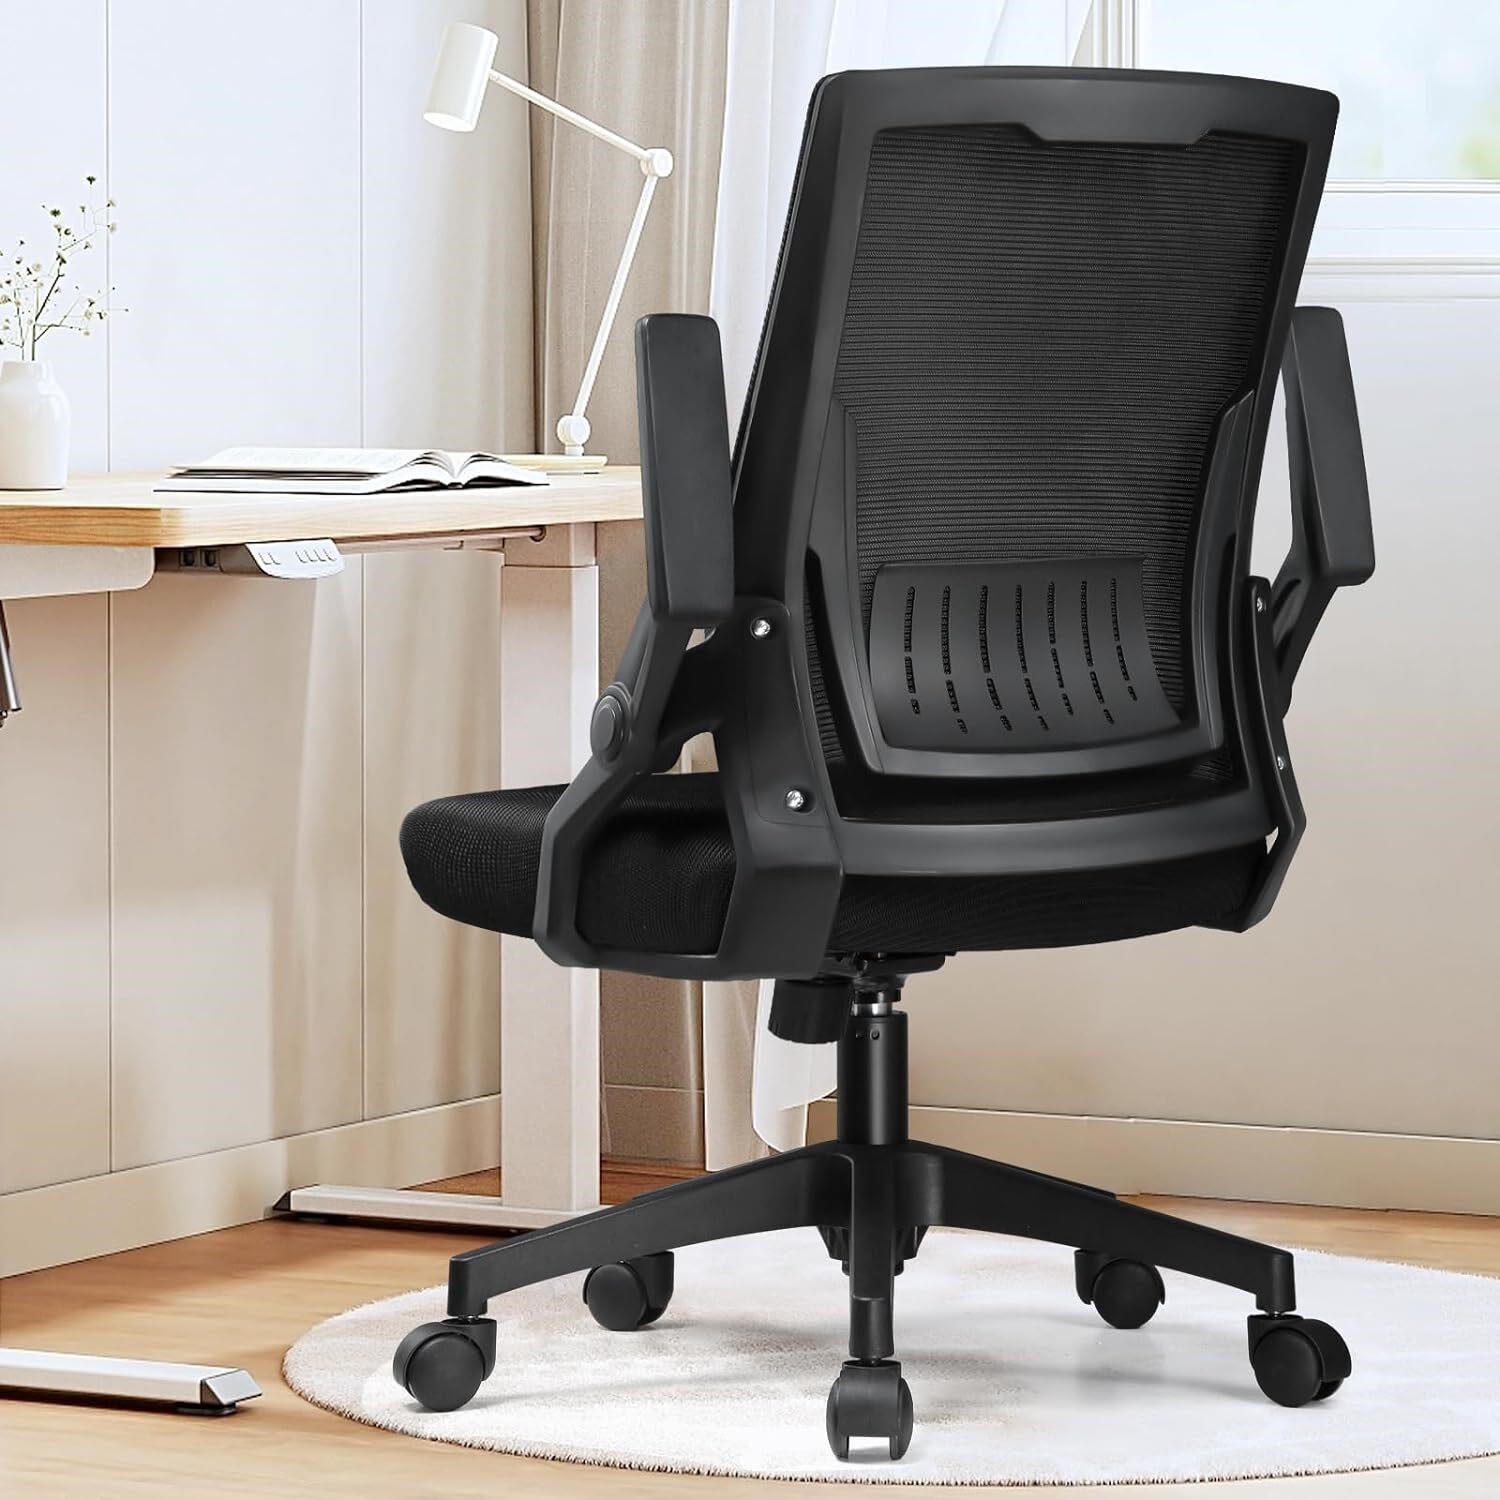 COMHOMA Ergonomic Office Chair, Flip-up Arms